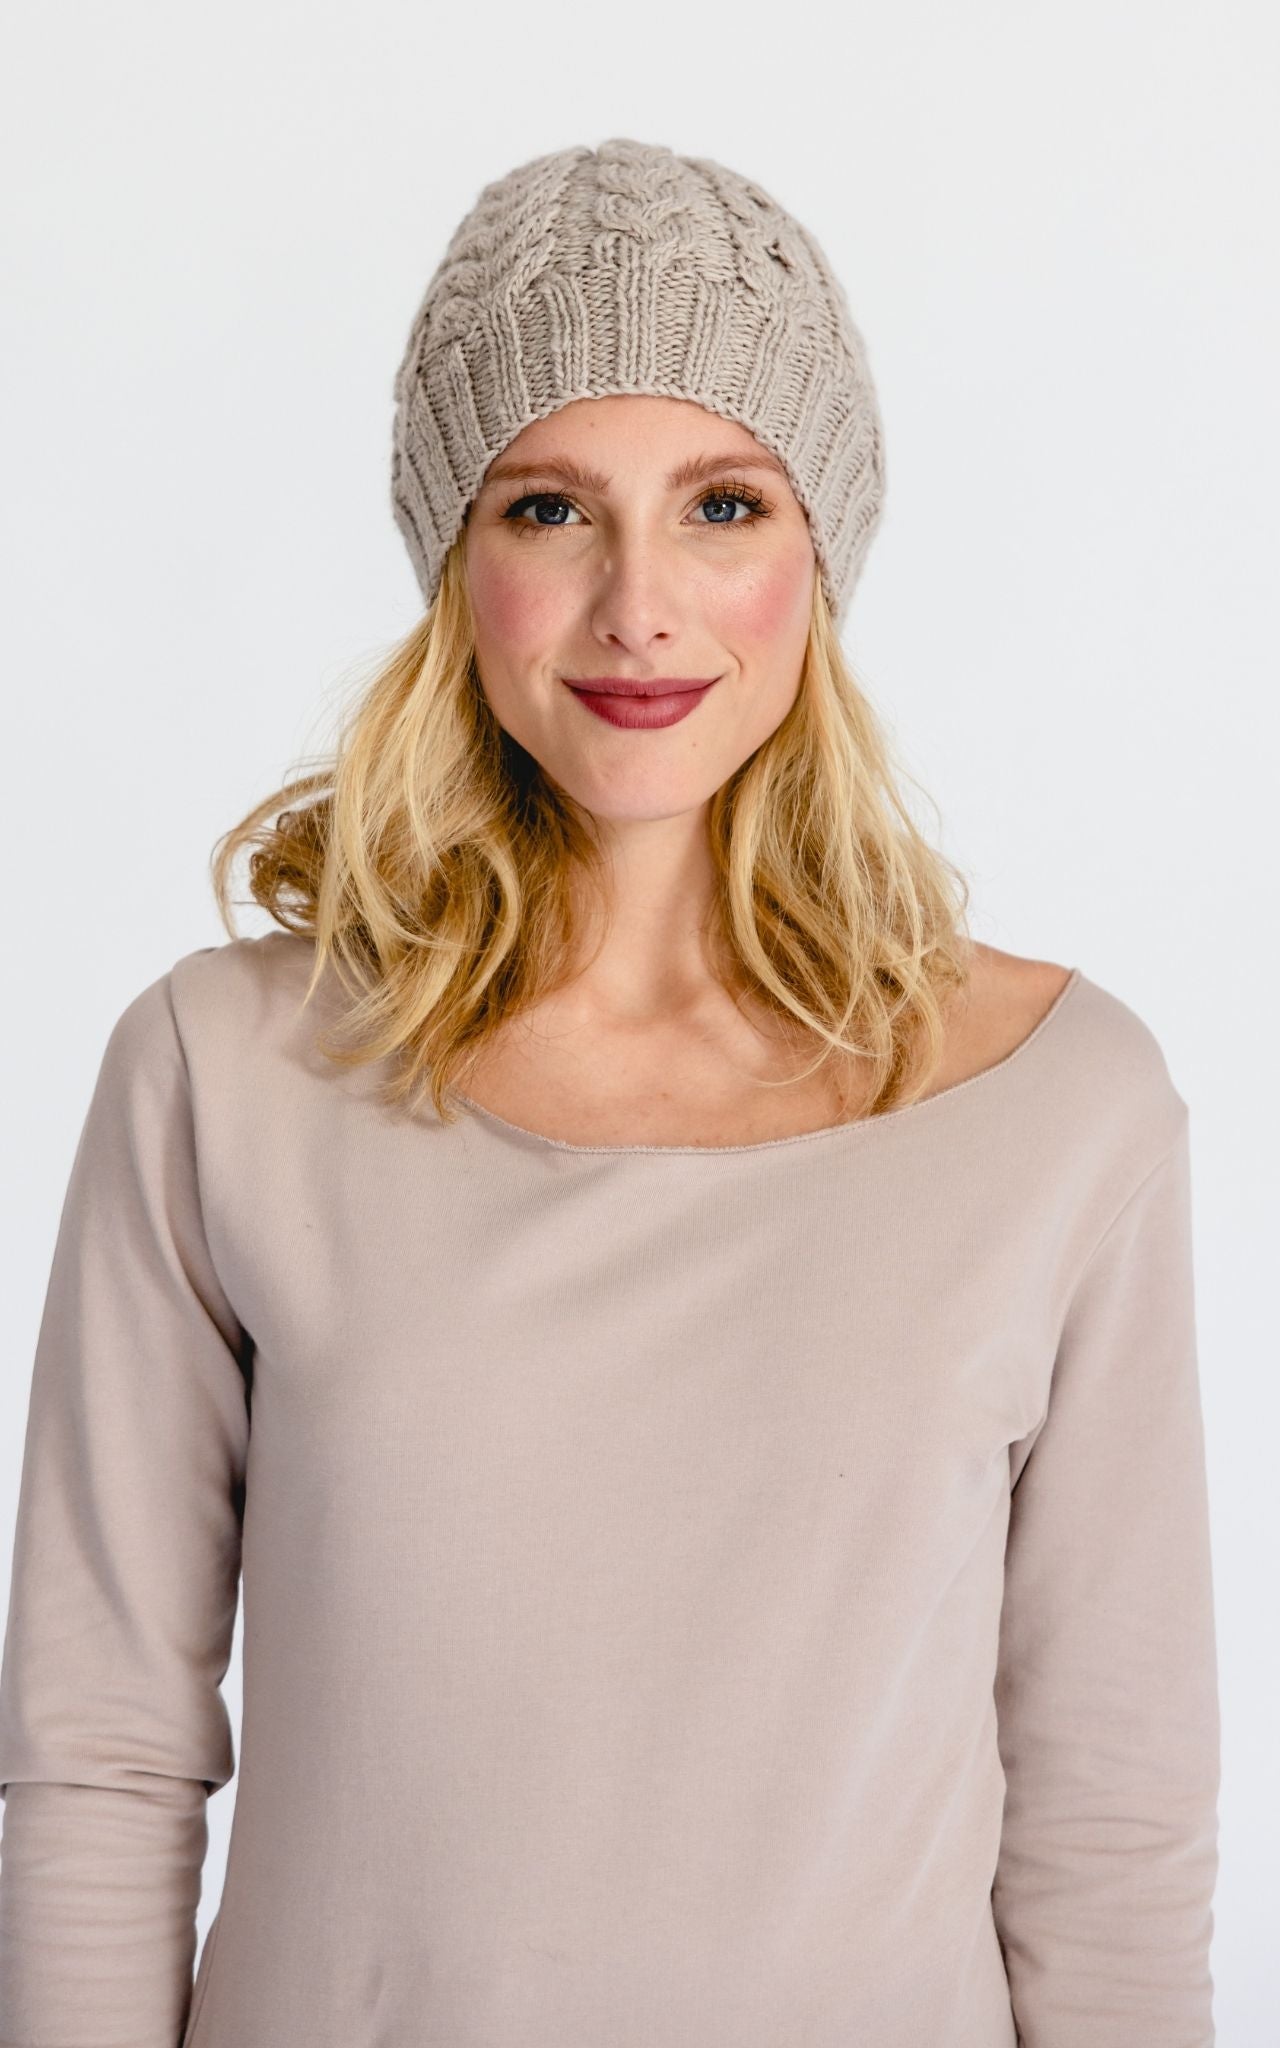 Surya Australia Ethical Cable Knit Merino Wool Beanie from Nepal - Sand